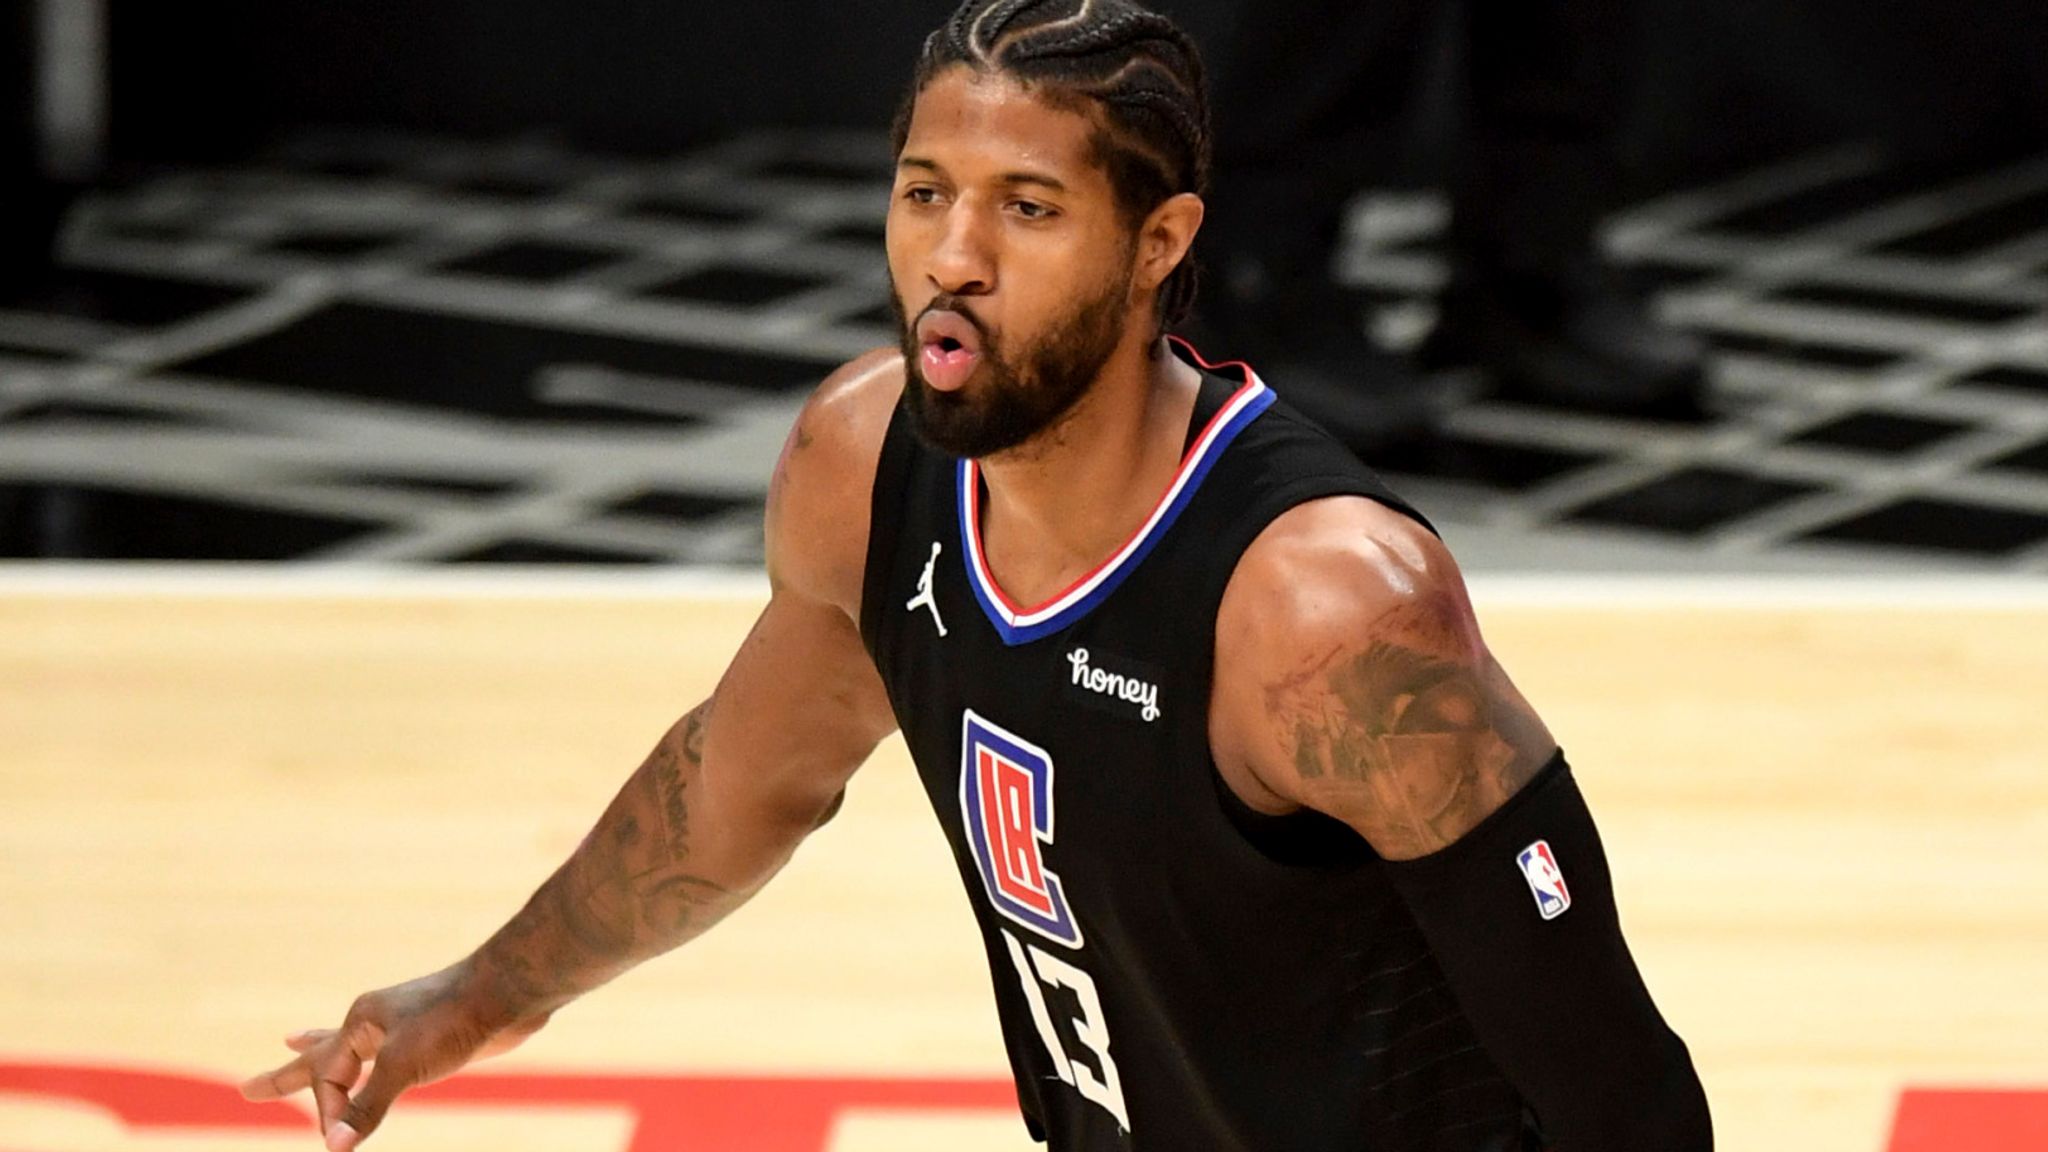 Paul George La Clippers Player Shirt